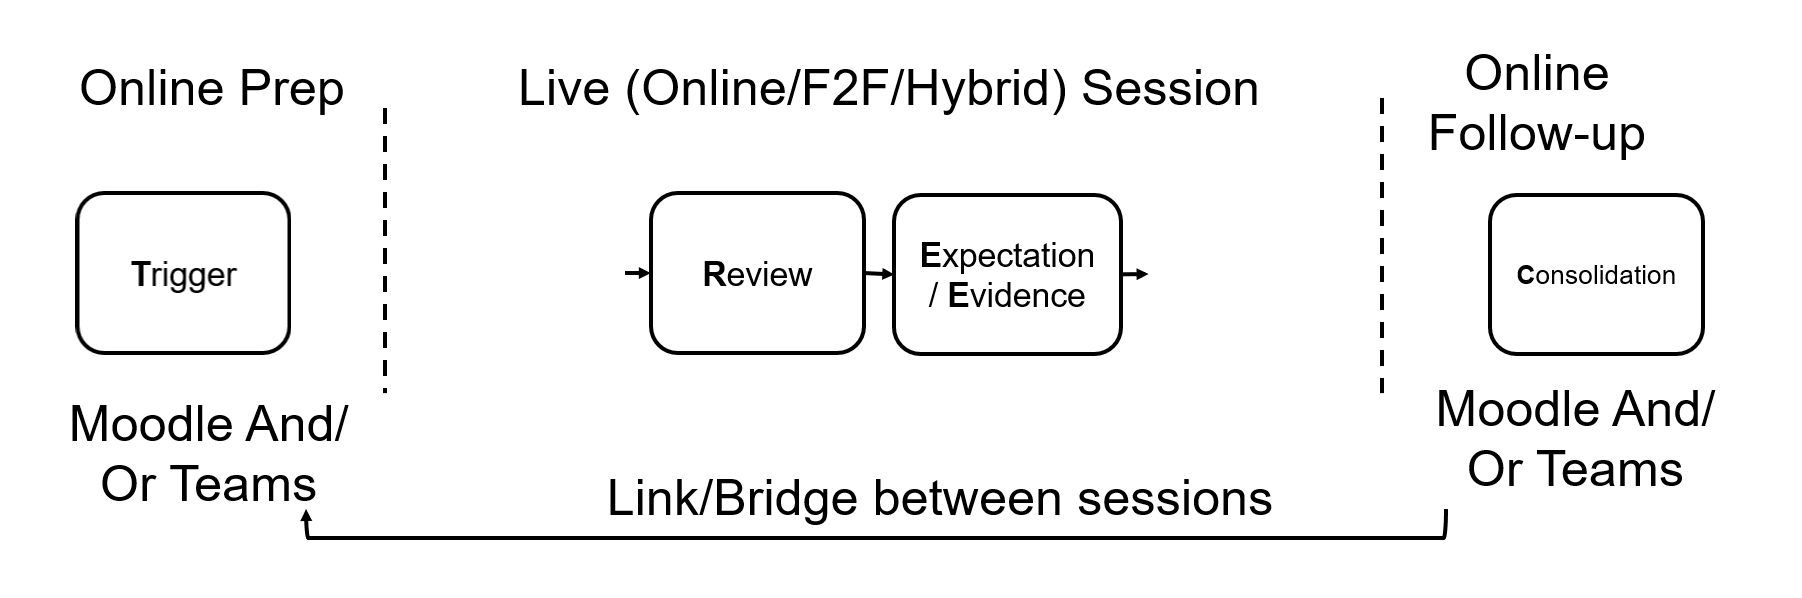 Image showing extended TREC model with Trigger stage brought forward as an advanced online prep activity and Consolidation stage pushed into an online follow-up activity providing a means of bridging between live teaching sessions.